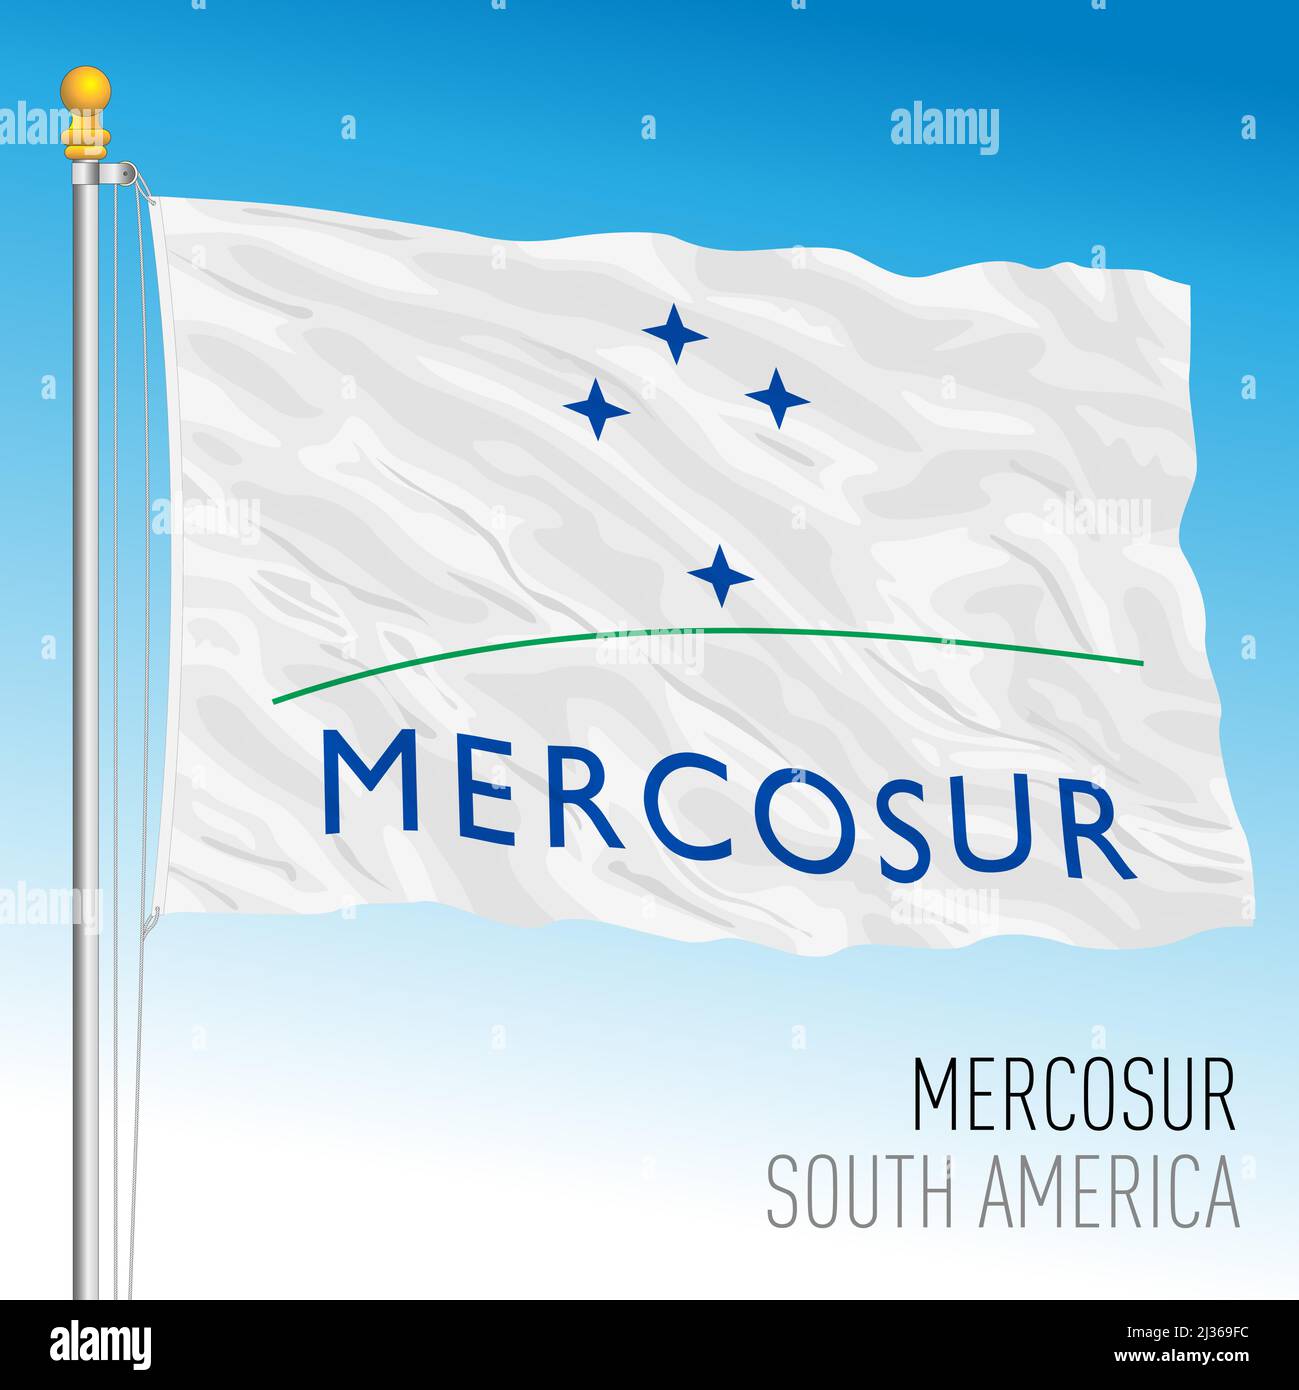 Mercosur or Mercosul organization flag, South America, isolated on the white background, vector illustration Stock Vector